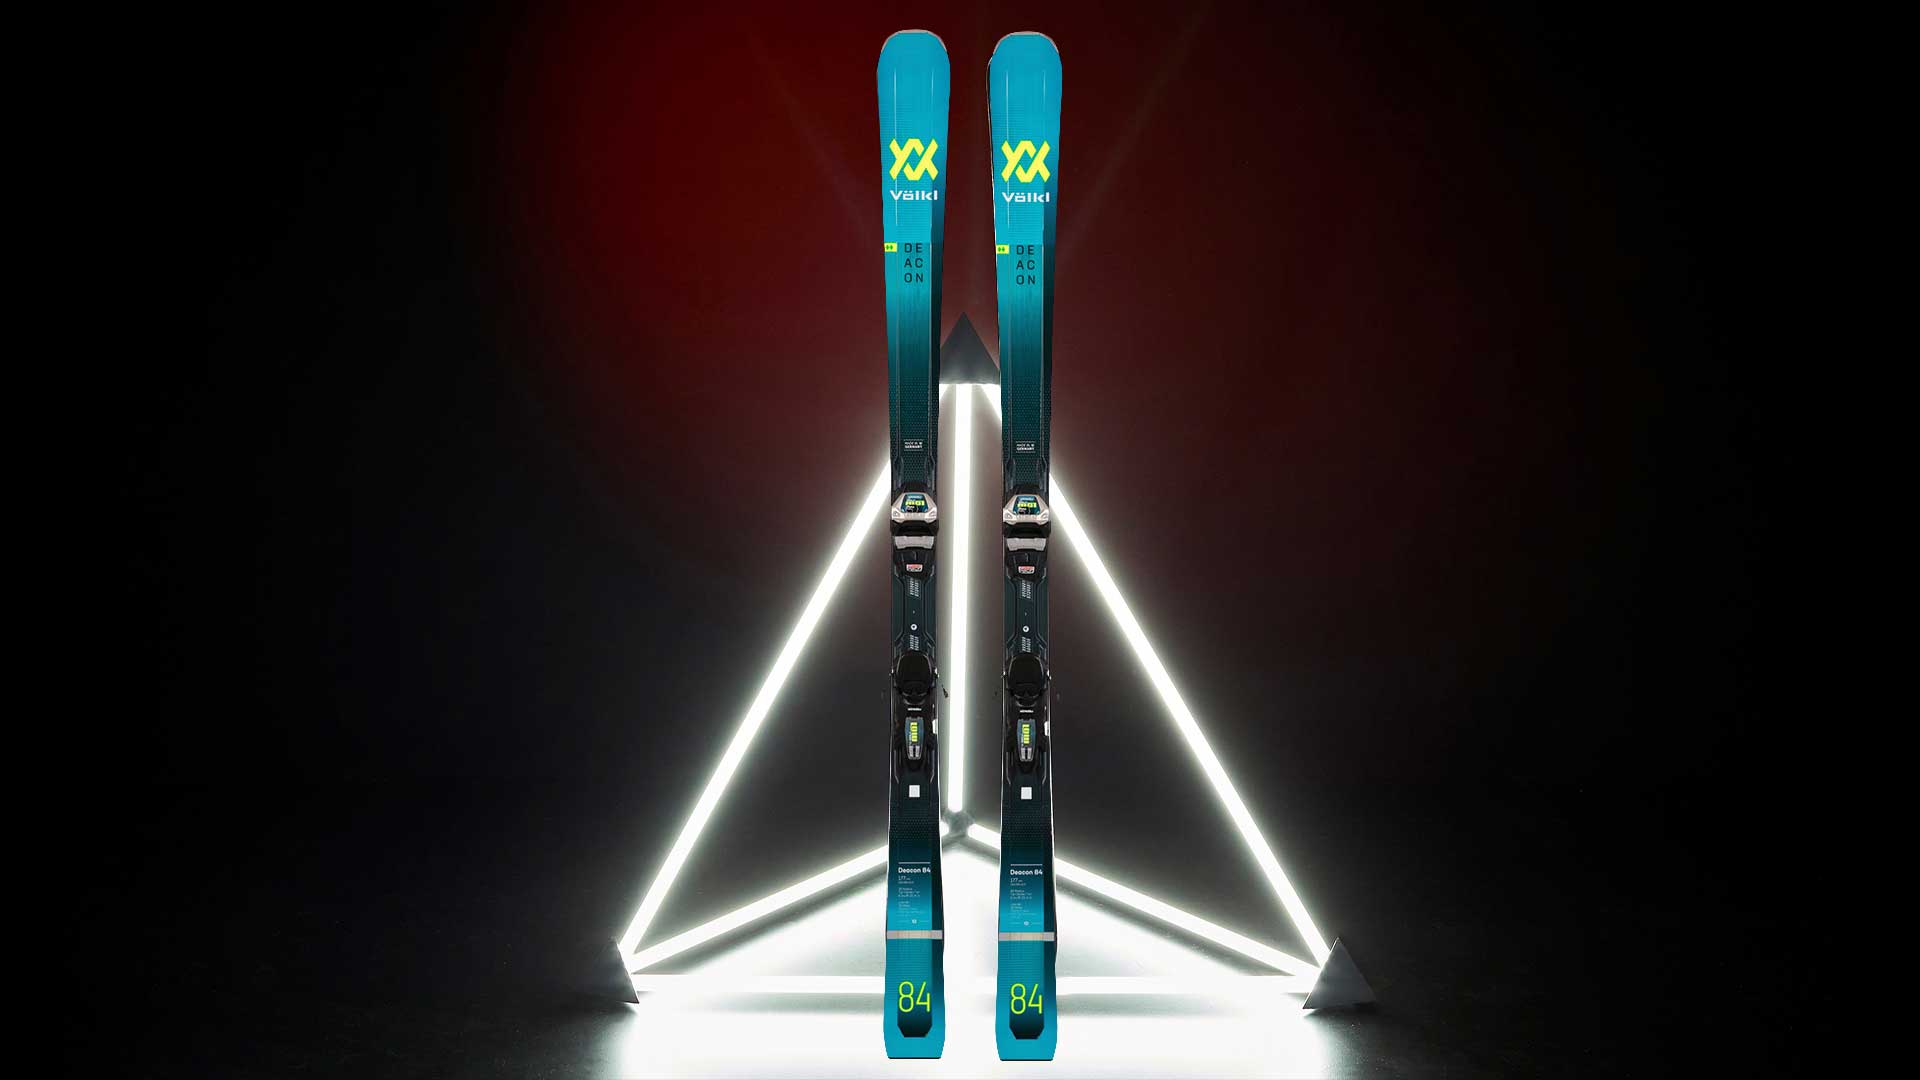 Best Carving Skis For 2022 | Piste Skis Designed For High-Angled Carving